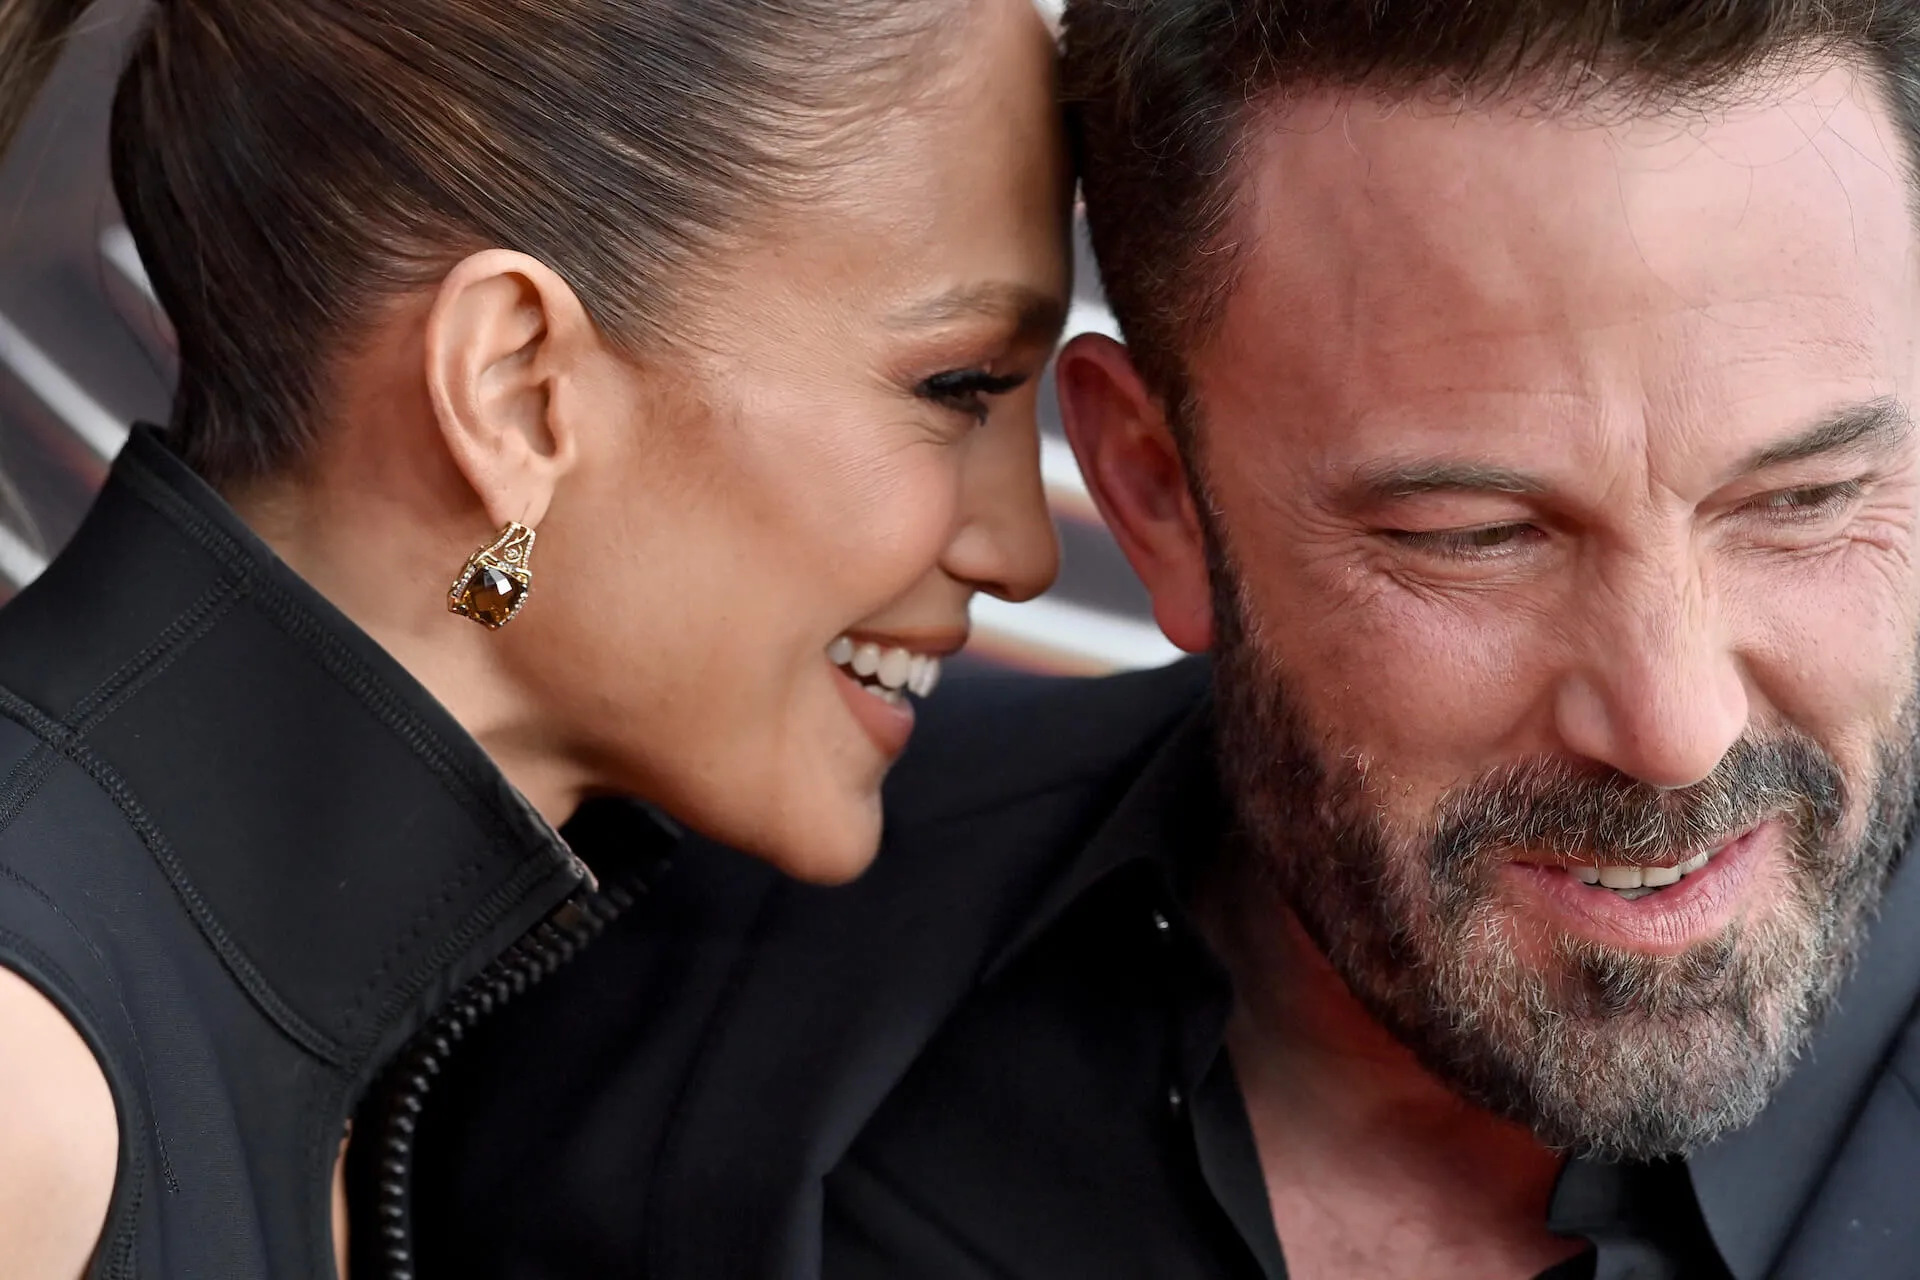 A close-up of Jennifer Lopez laughing into Ben Affleck's ear as he also laughs